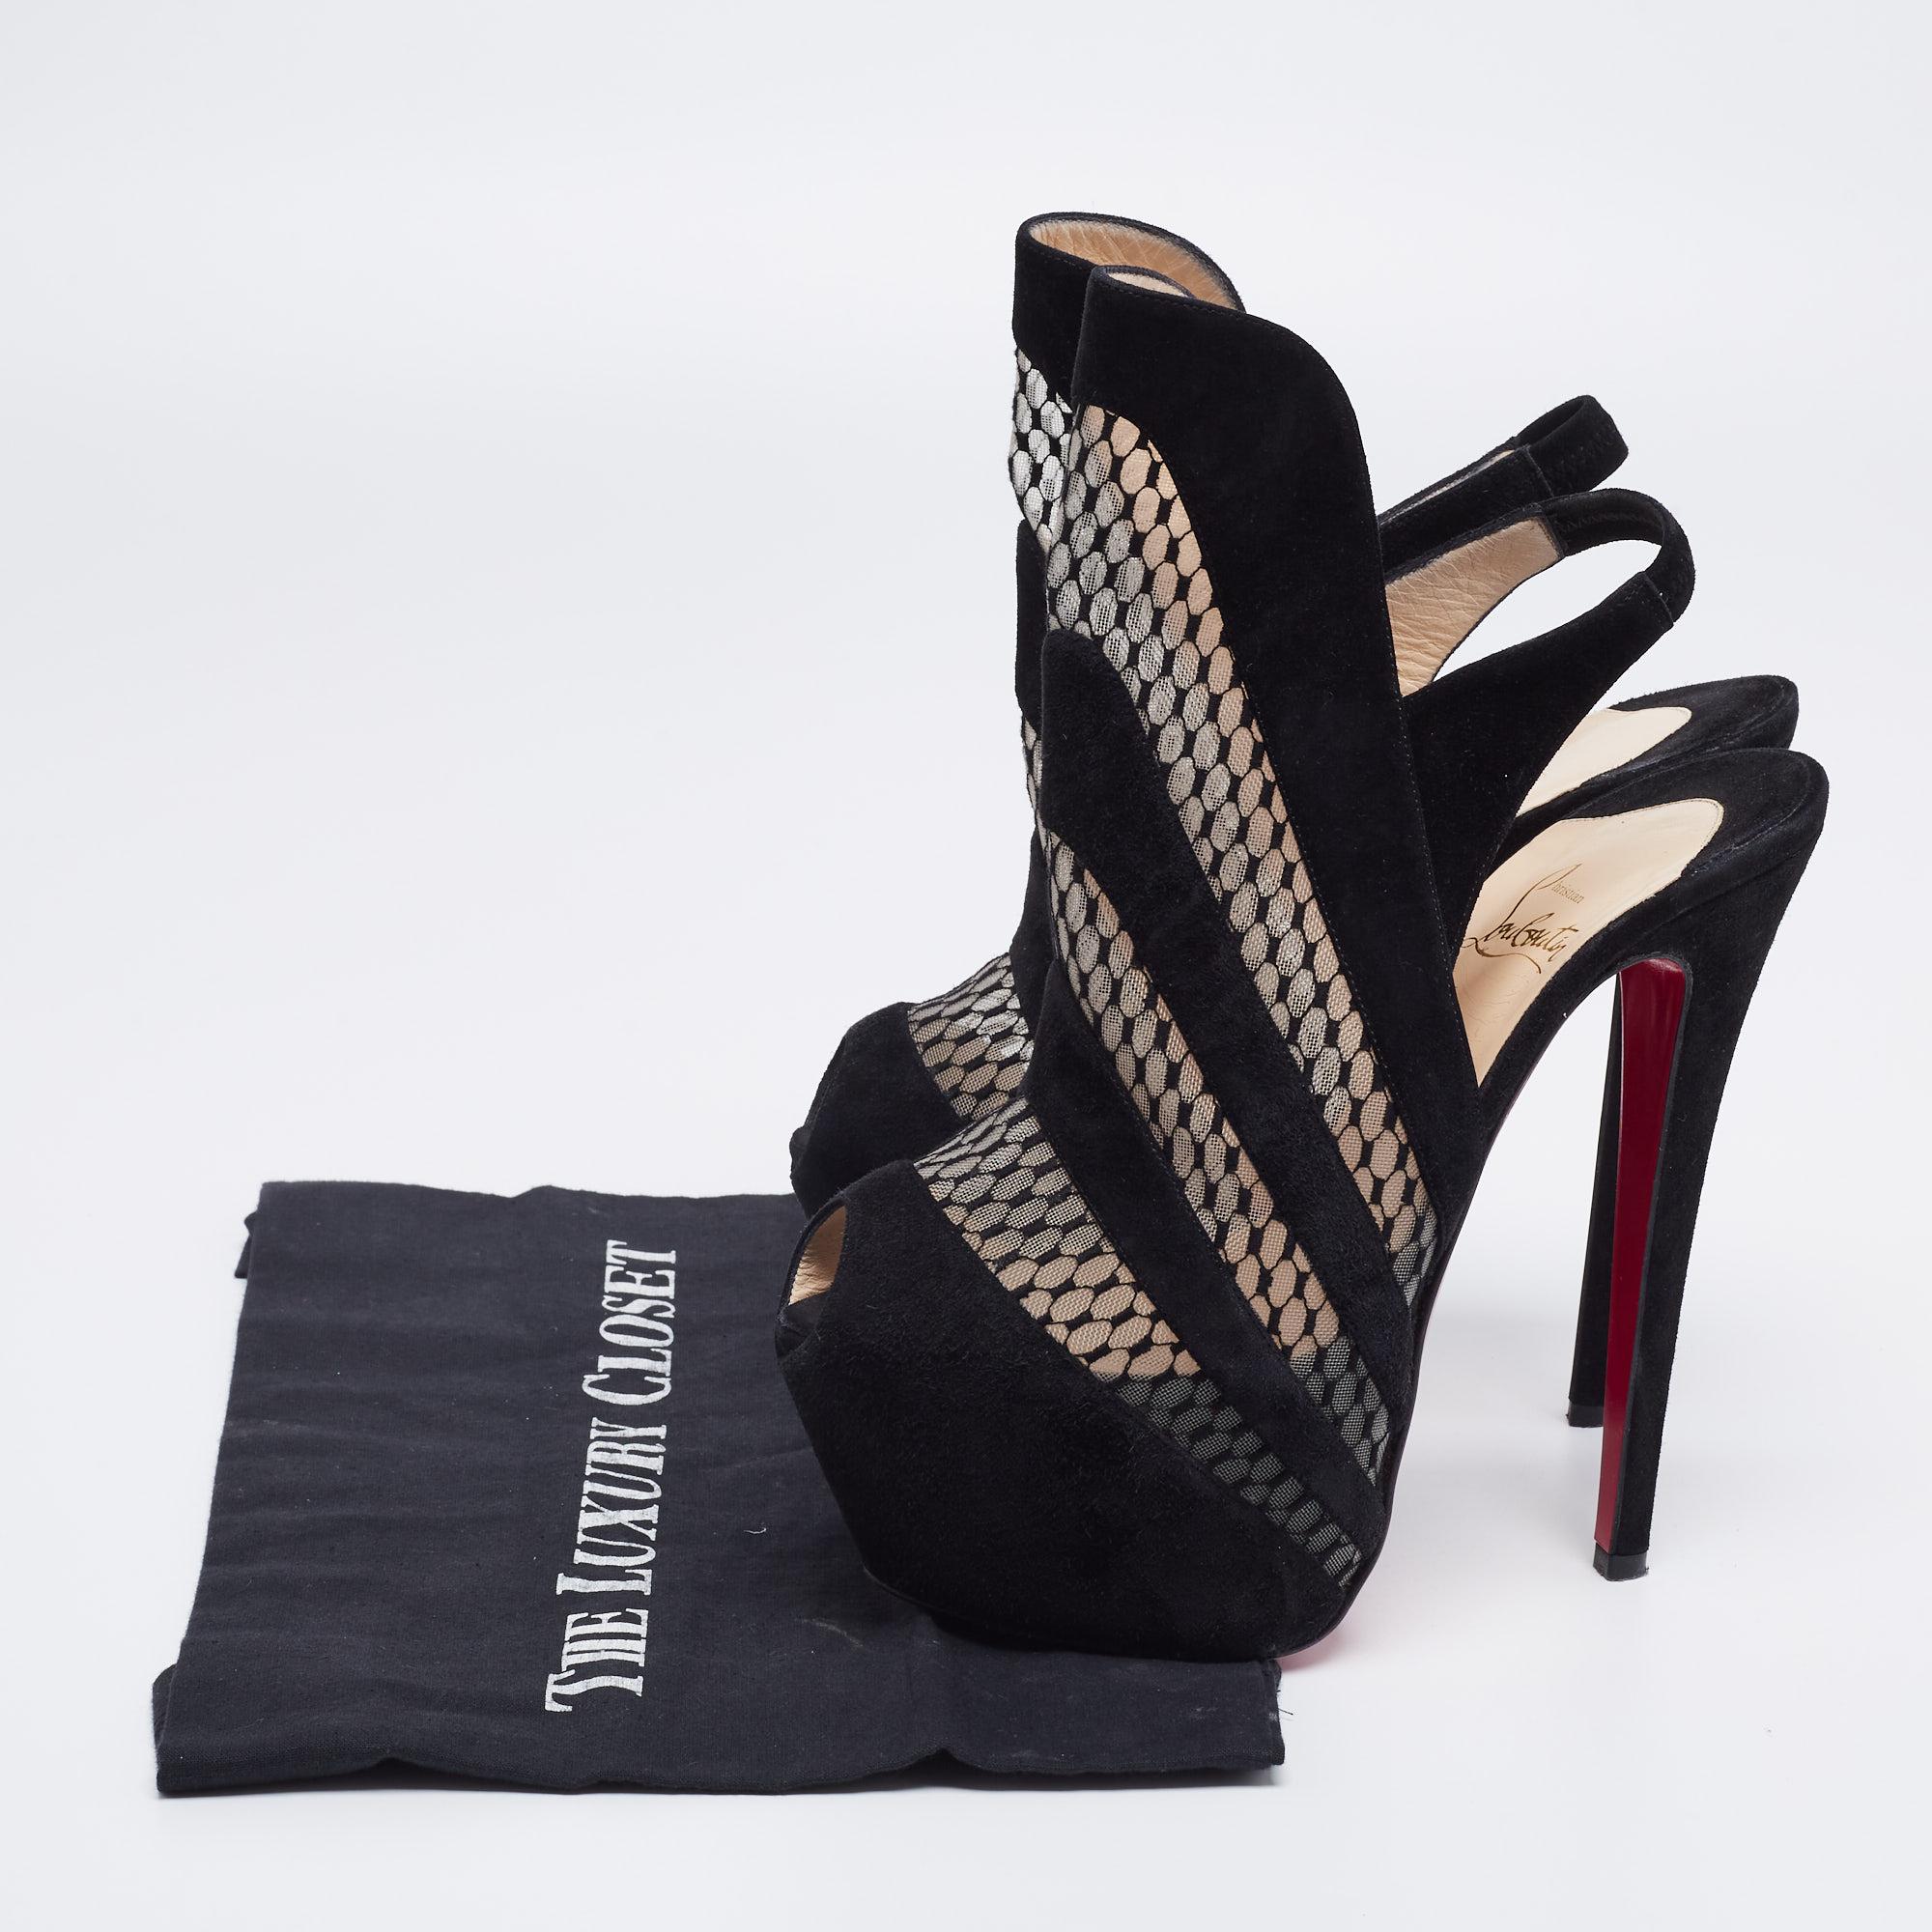 Christian Louboutin Black Suede and Mesh Guizi Platform Ankle Booties Size 38 4